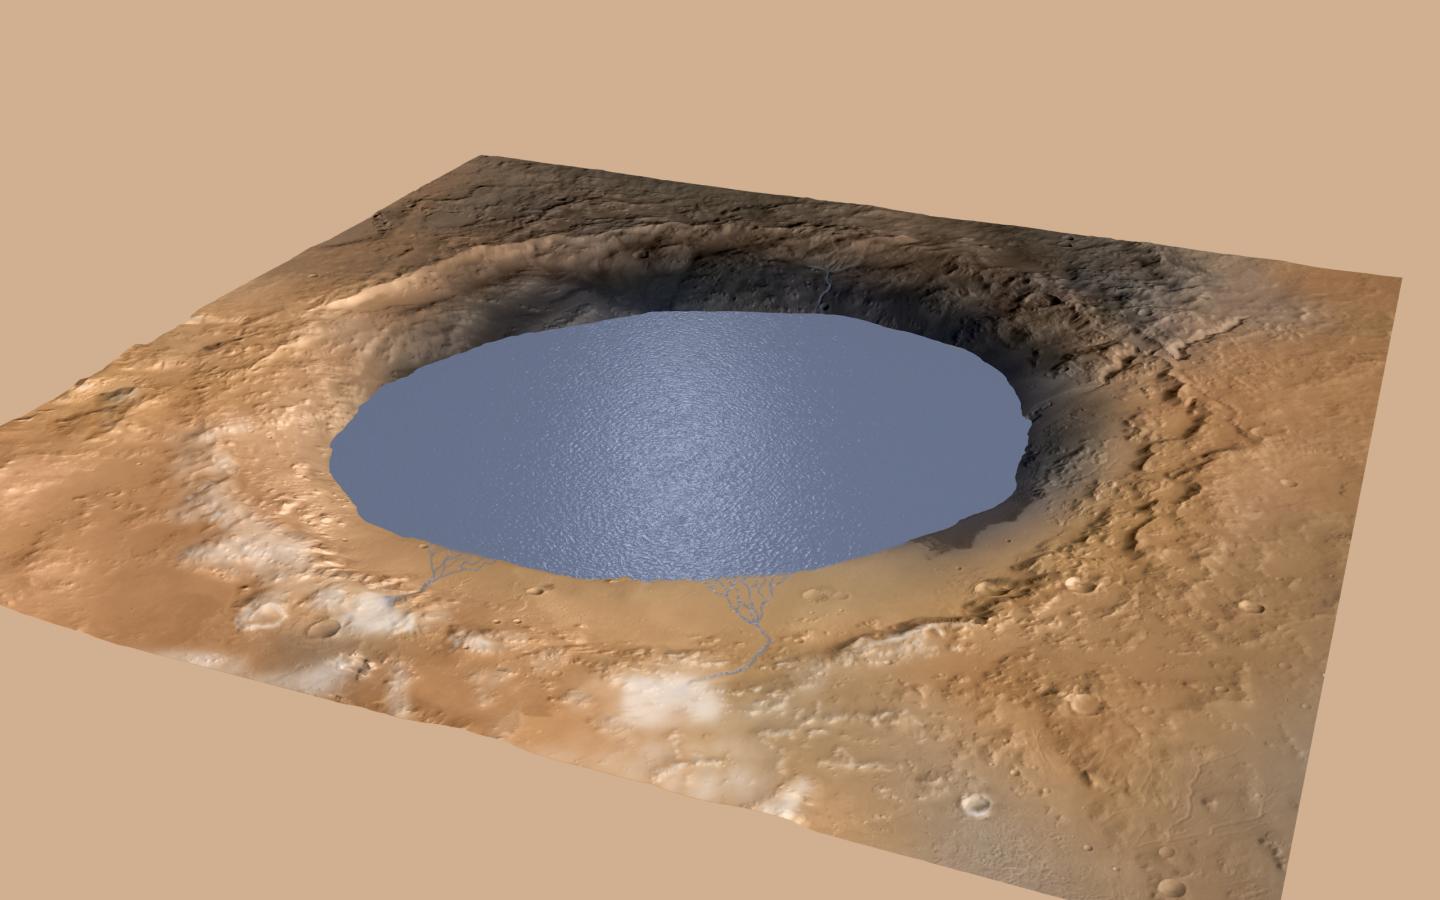 Gale Crater with Water